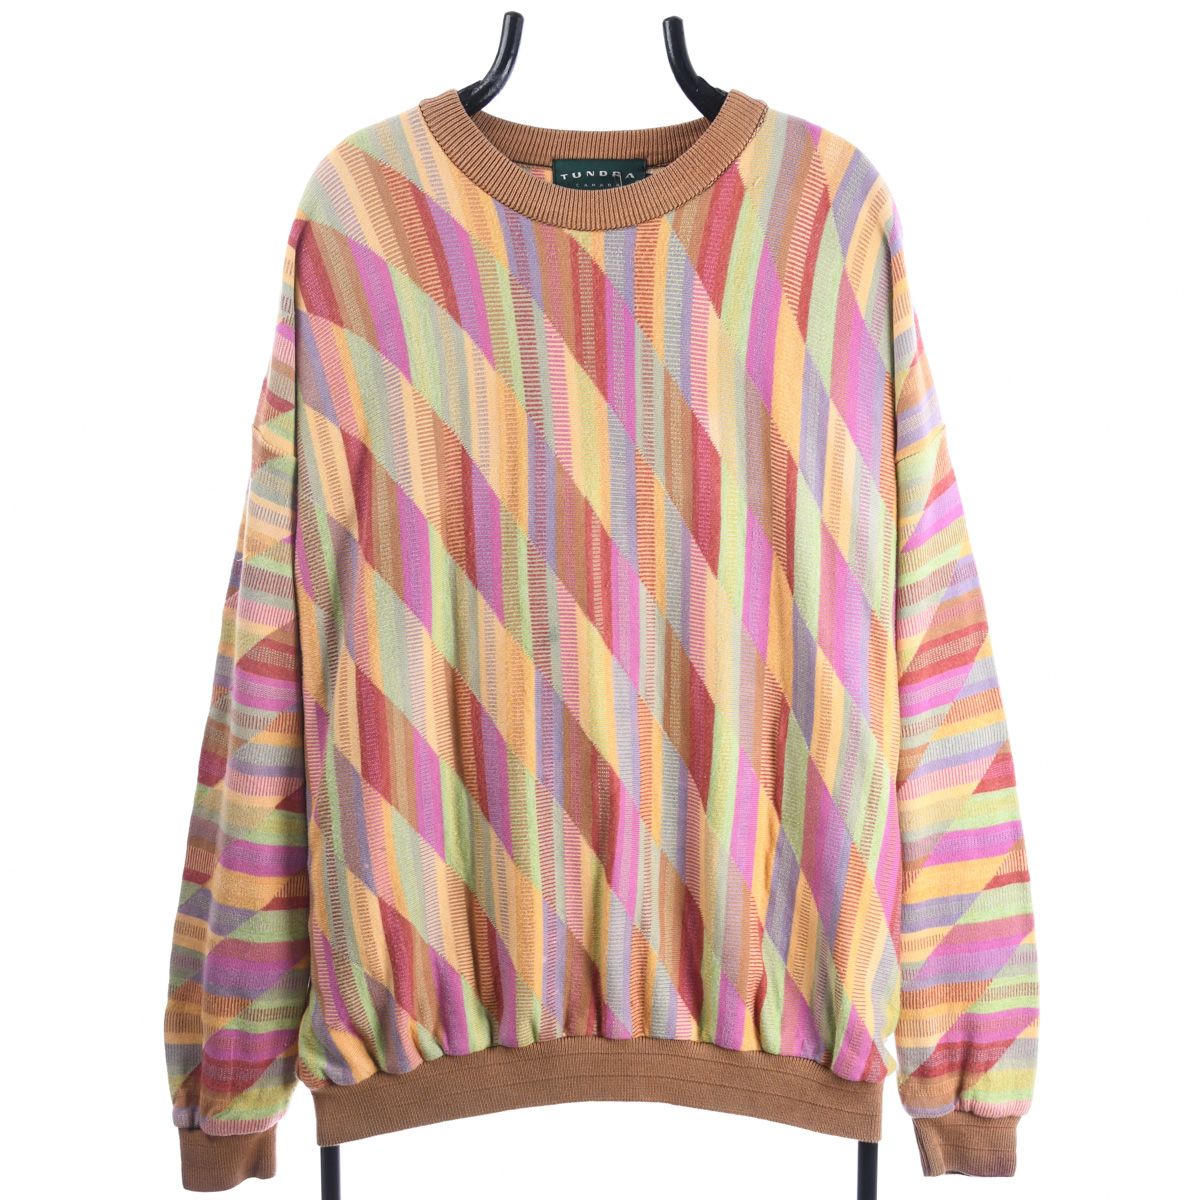 Tundra Patterned Loose Fit Jumper